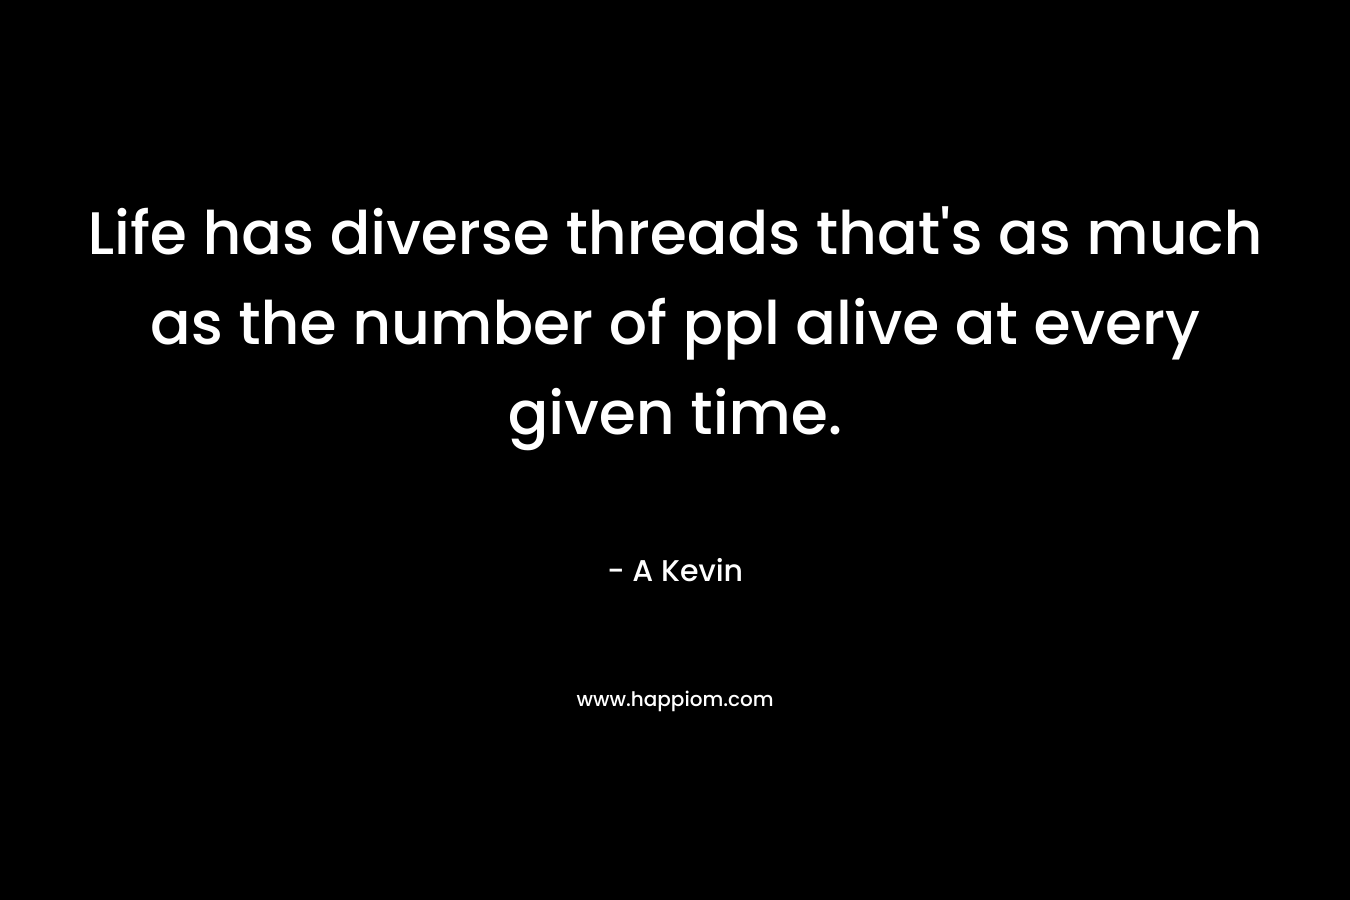 Life has diverse threads that's as much as the number of ppl alive at every given time.